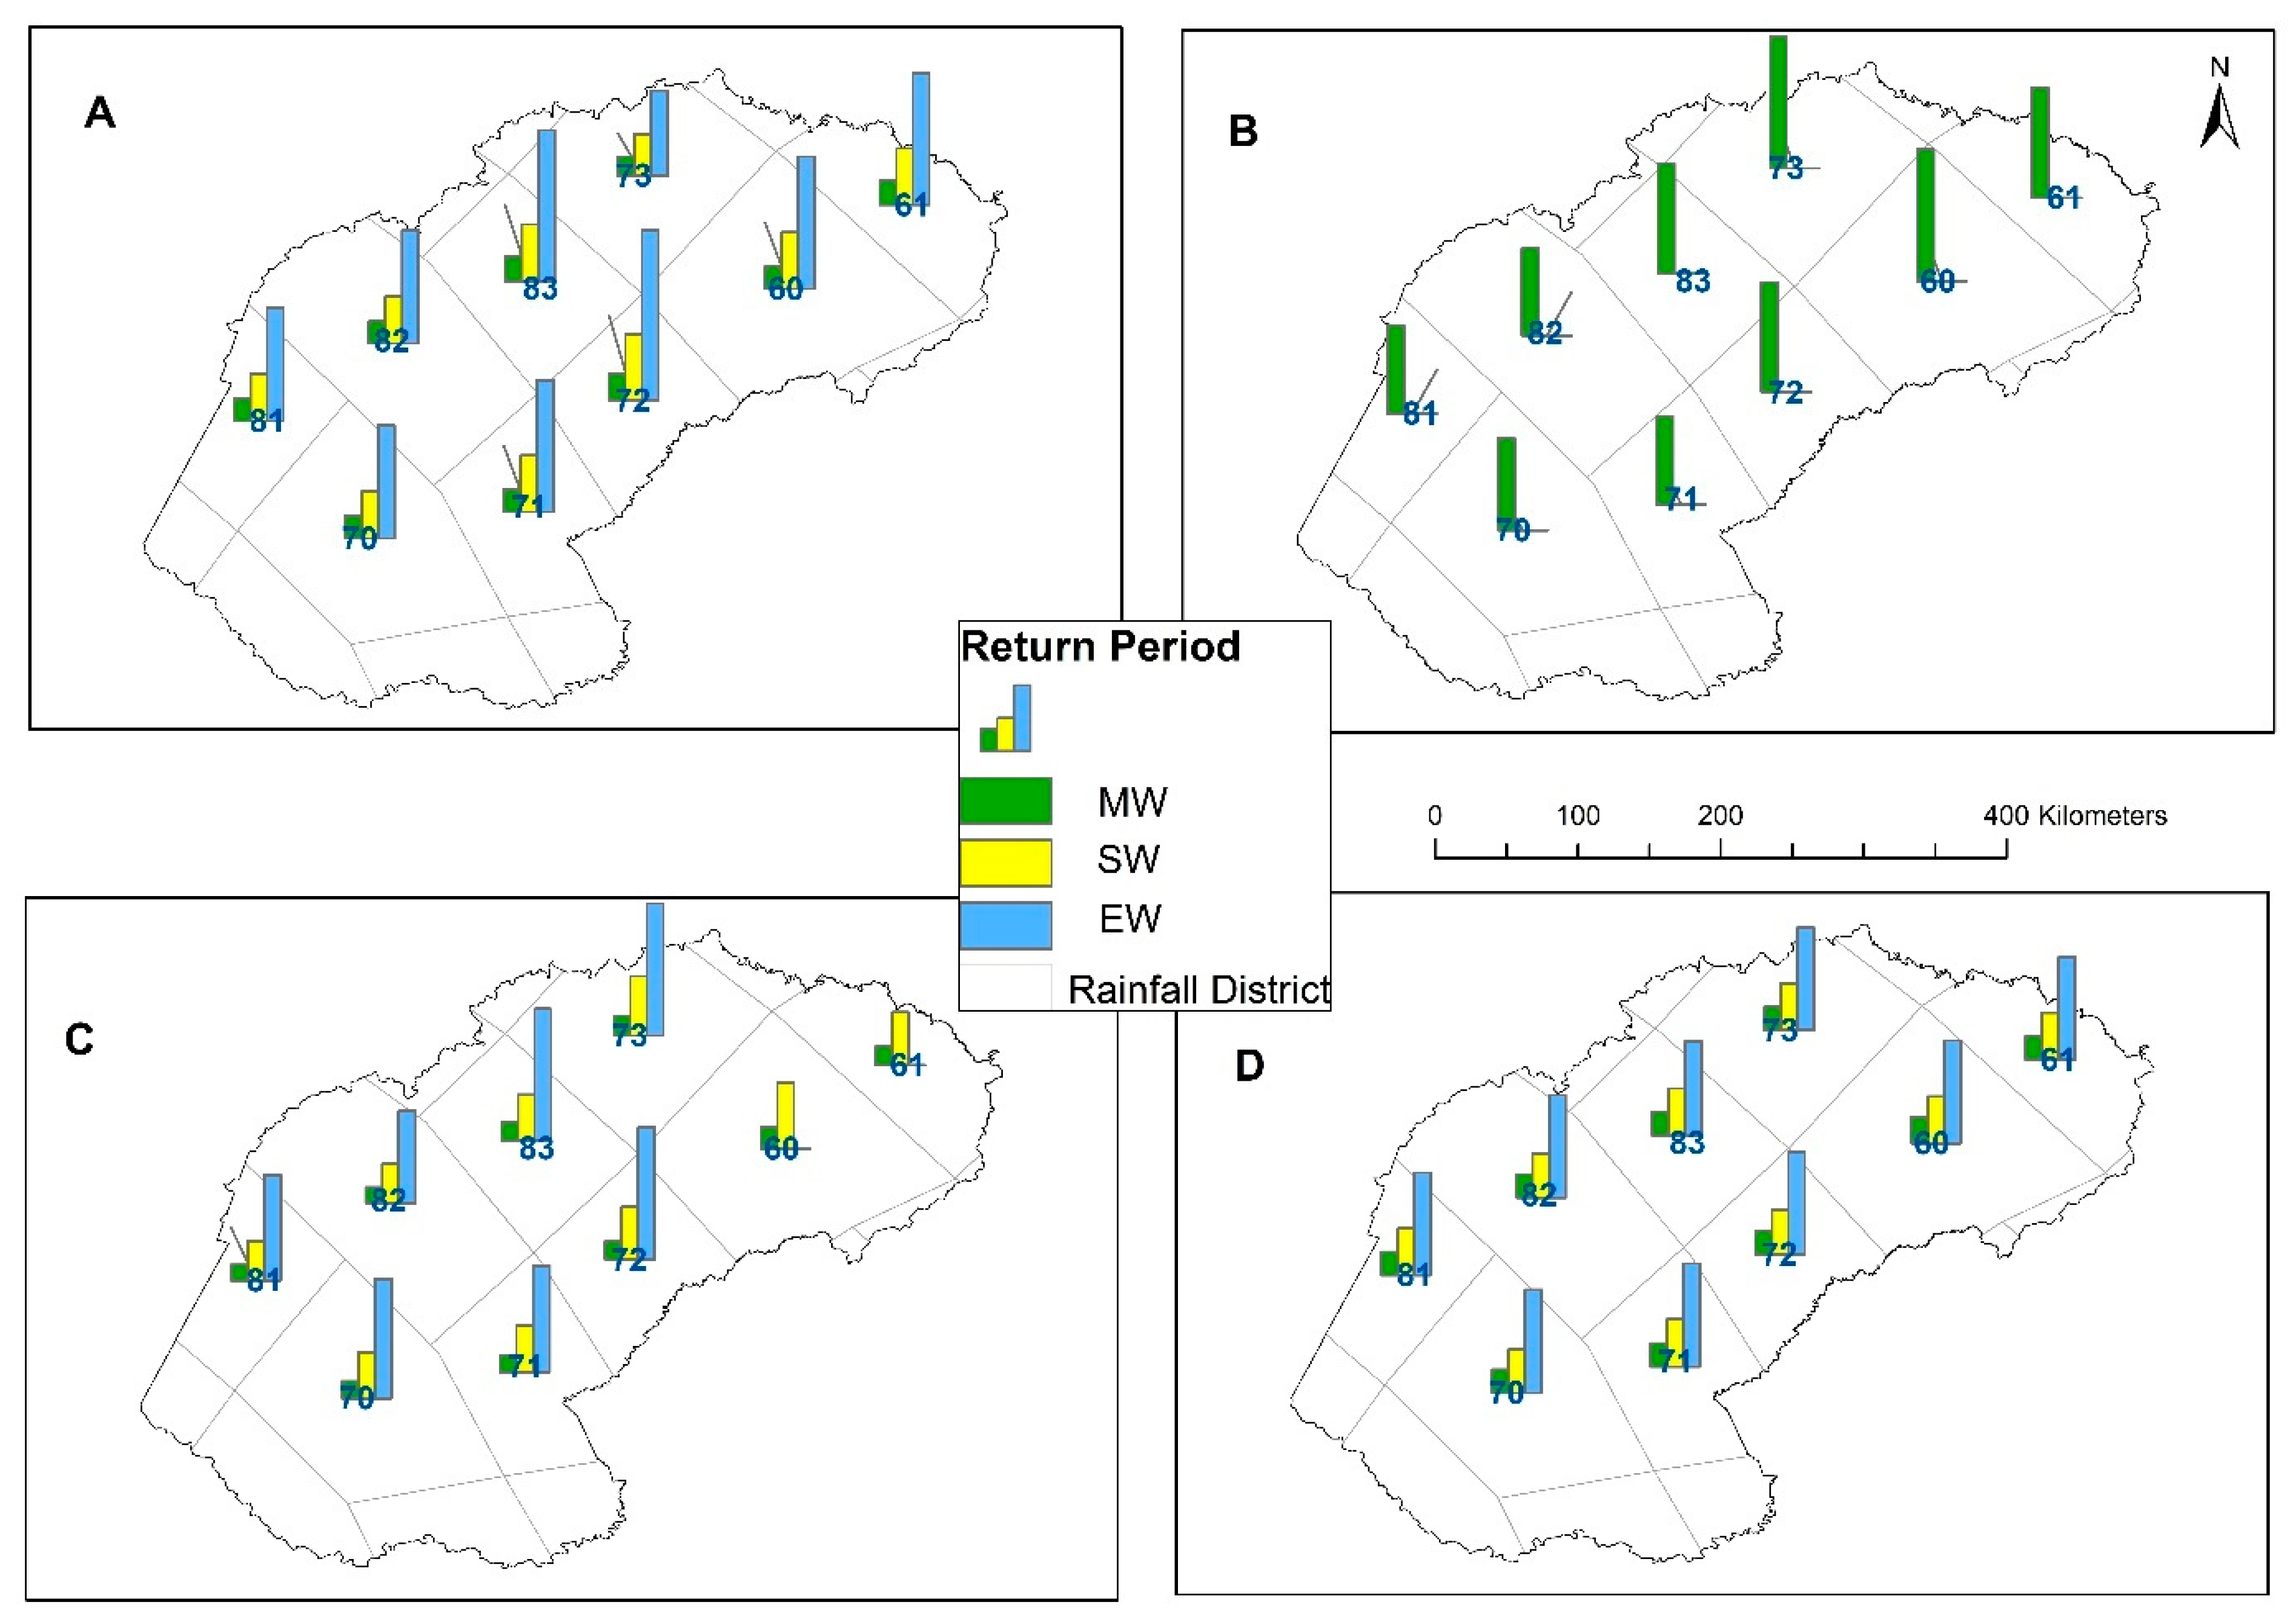 Water | Free Full-Text | An Analysis of Precipitation Extreme Events Based  on the SPI and EDI Values in the Free State Province, South Africa | HTML